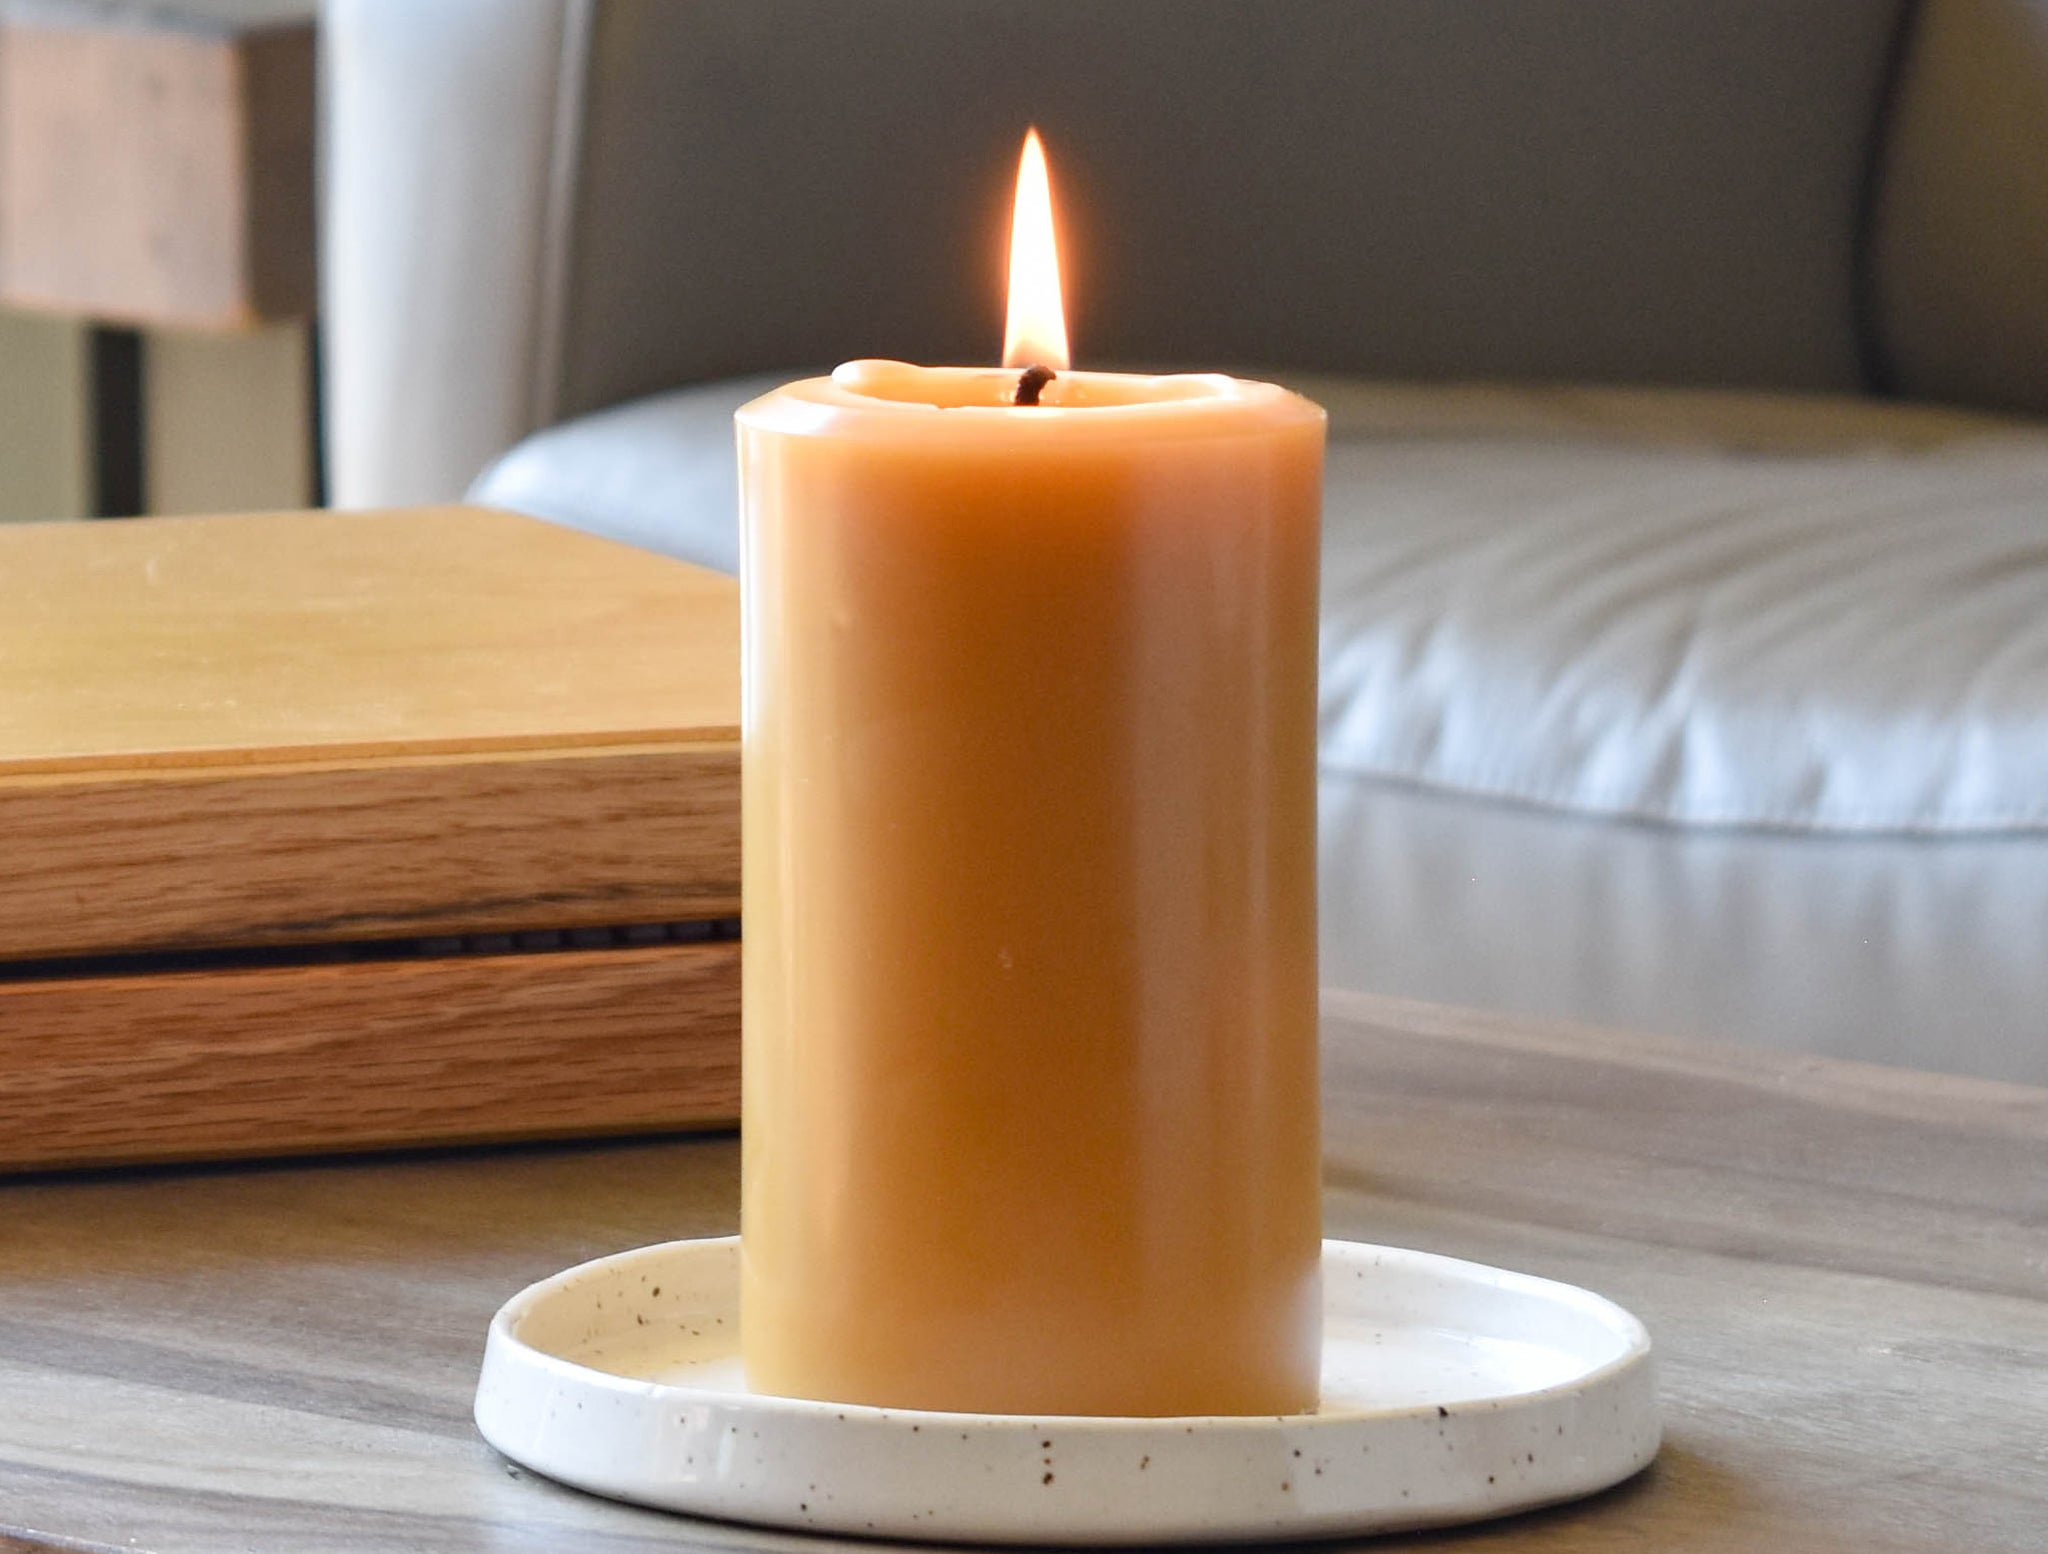 How to Burn Pillar Candles - 3 Mistakes you might be making